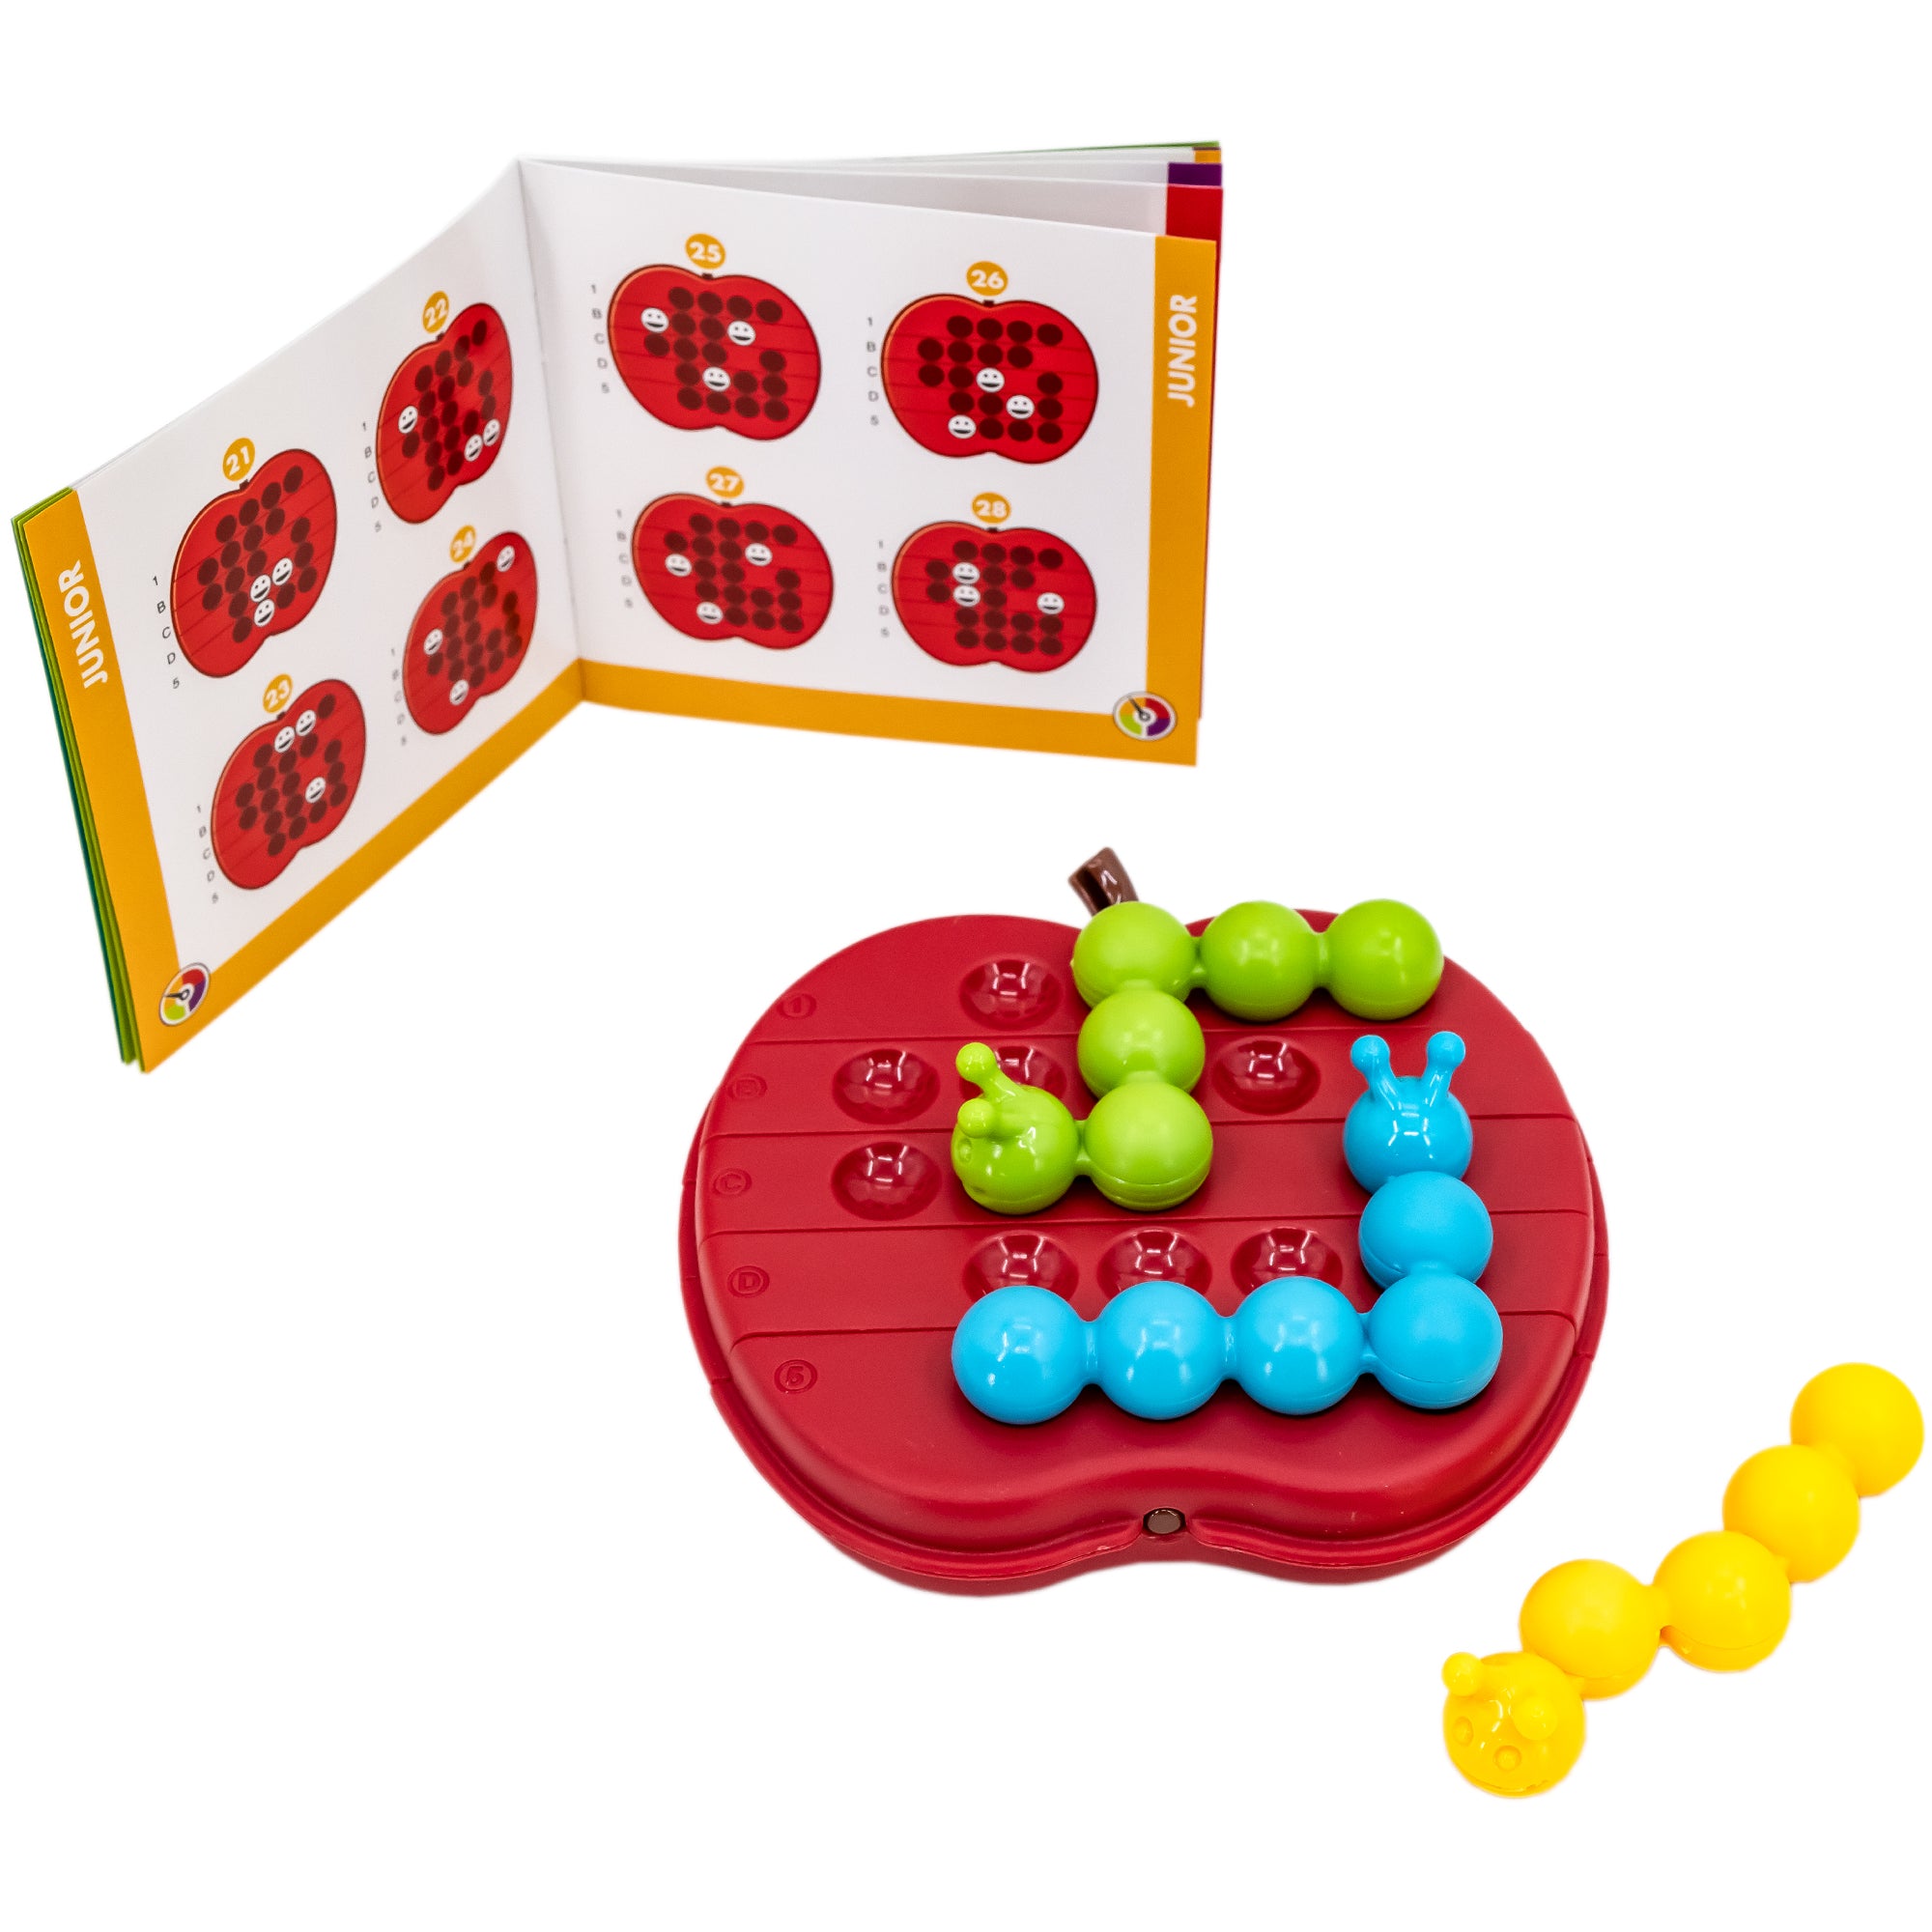 The Apple Twist Smart Game laid out with the green and blue caterpillar pieces in place on the board and the yellow caterpillar off to the right side, waiting to be put in place. In the upper-right is the instruction booklet open to one of the junior activities.